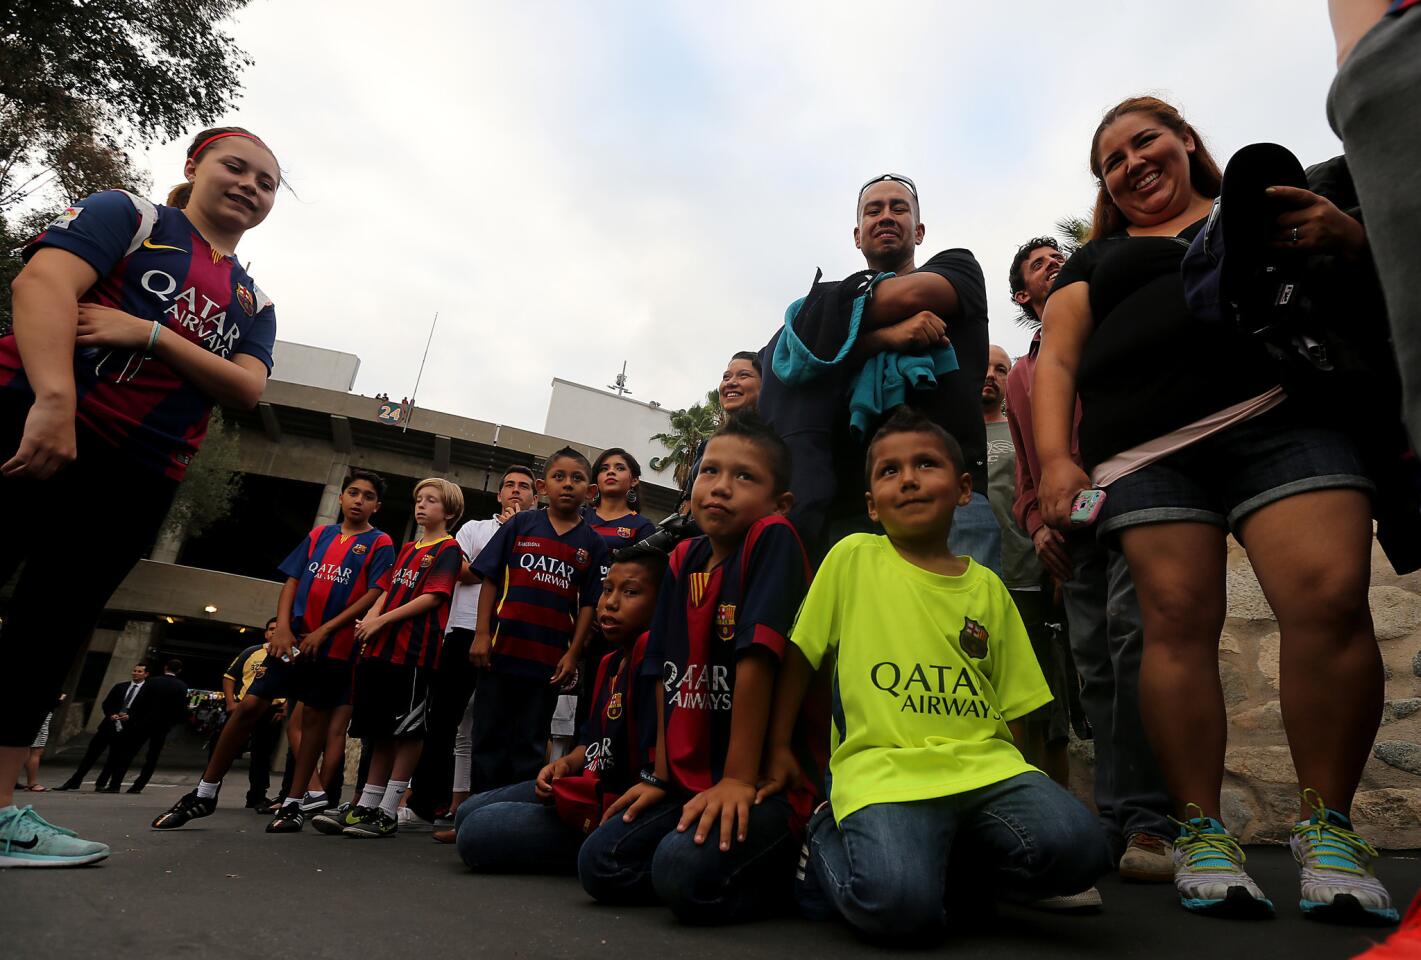 Soccer fans gather for an International Champions Cup match between FC Barcelona and the Los Angeles Galaxy at the Rose Bowl on Tuesday.